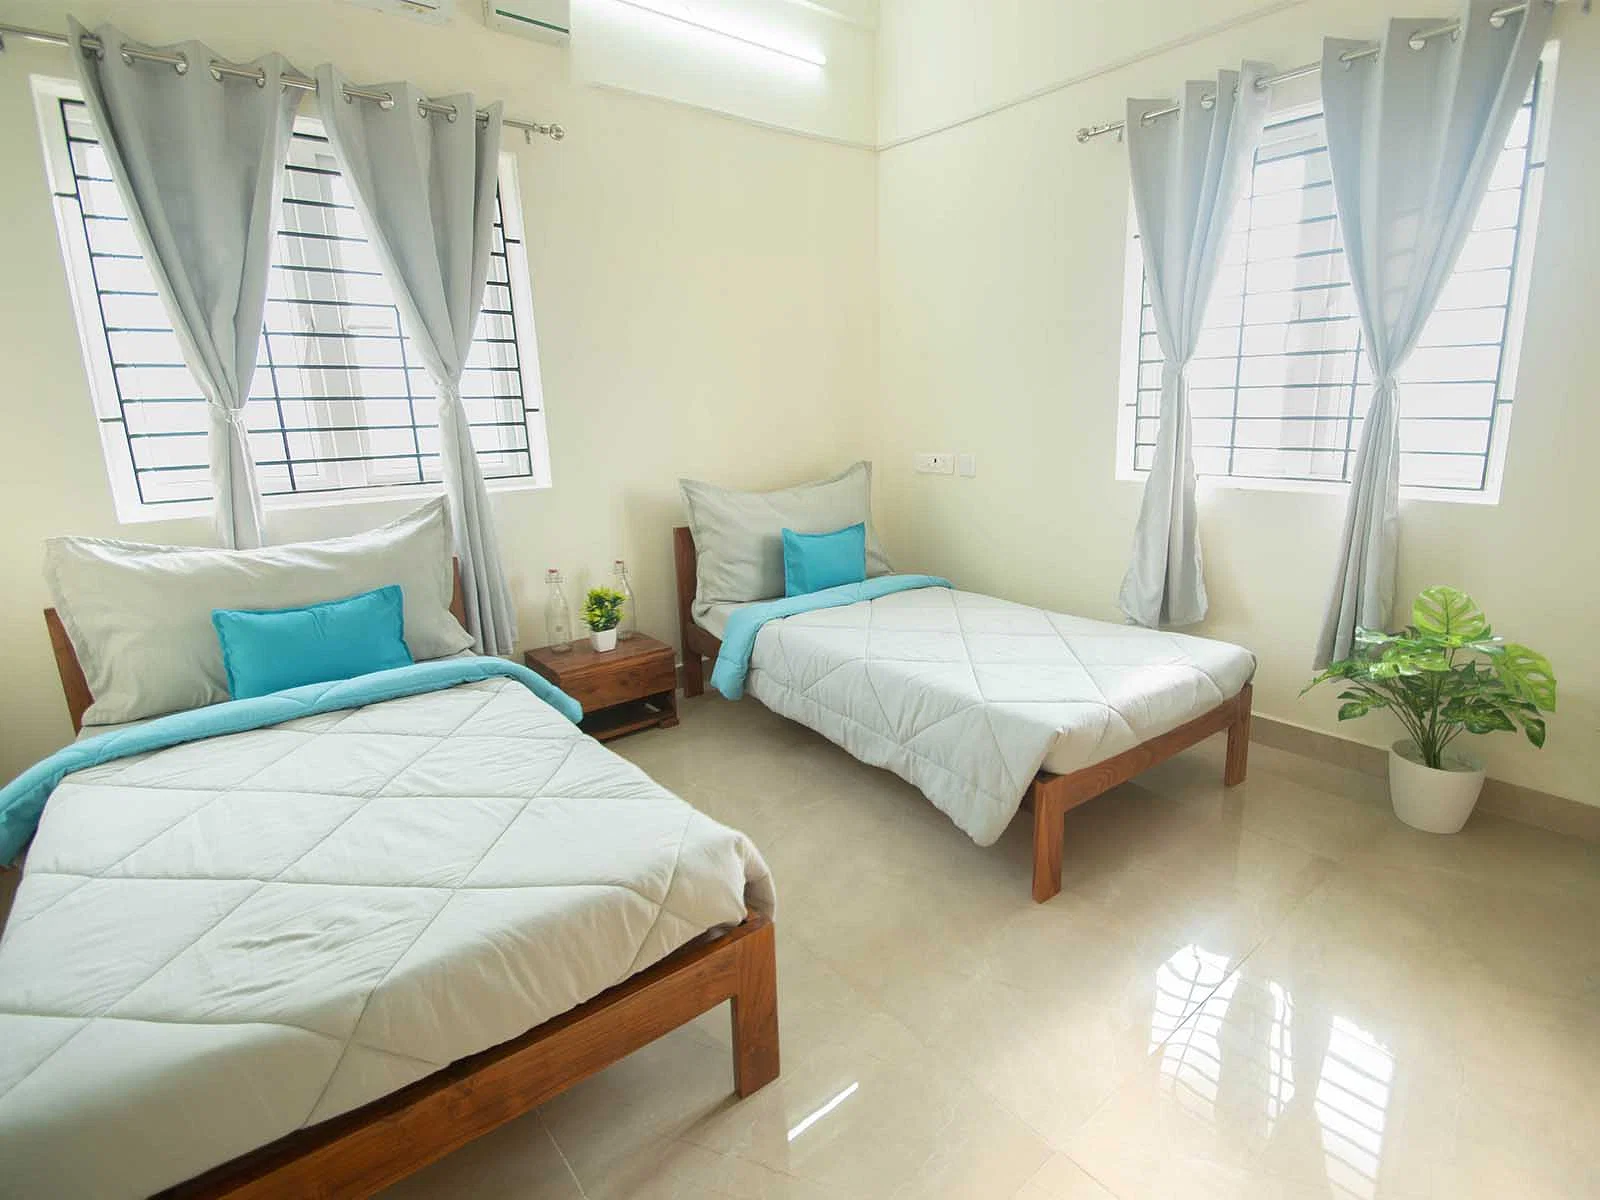 safe and affordable hostels for couple students with 24/7 security and CCTV surveillance-Zolo Ironwood